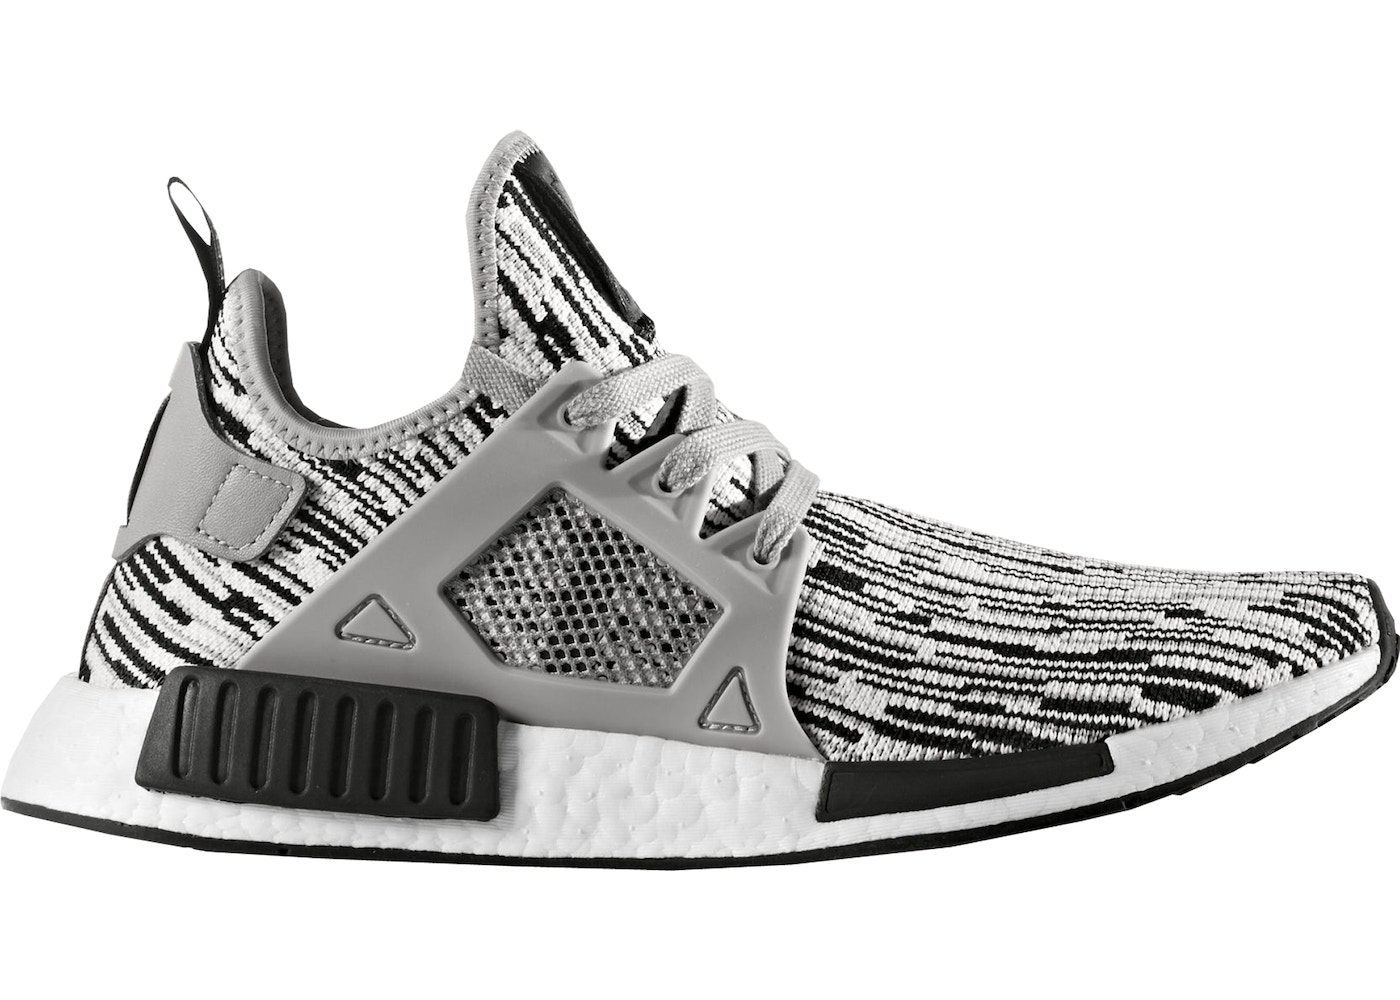 Acheter adidas NMD XR1 Chaussures et sneakers neuves